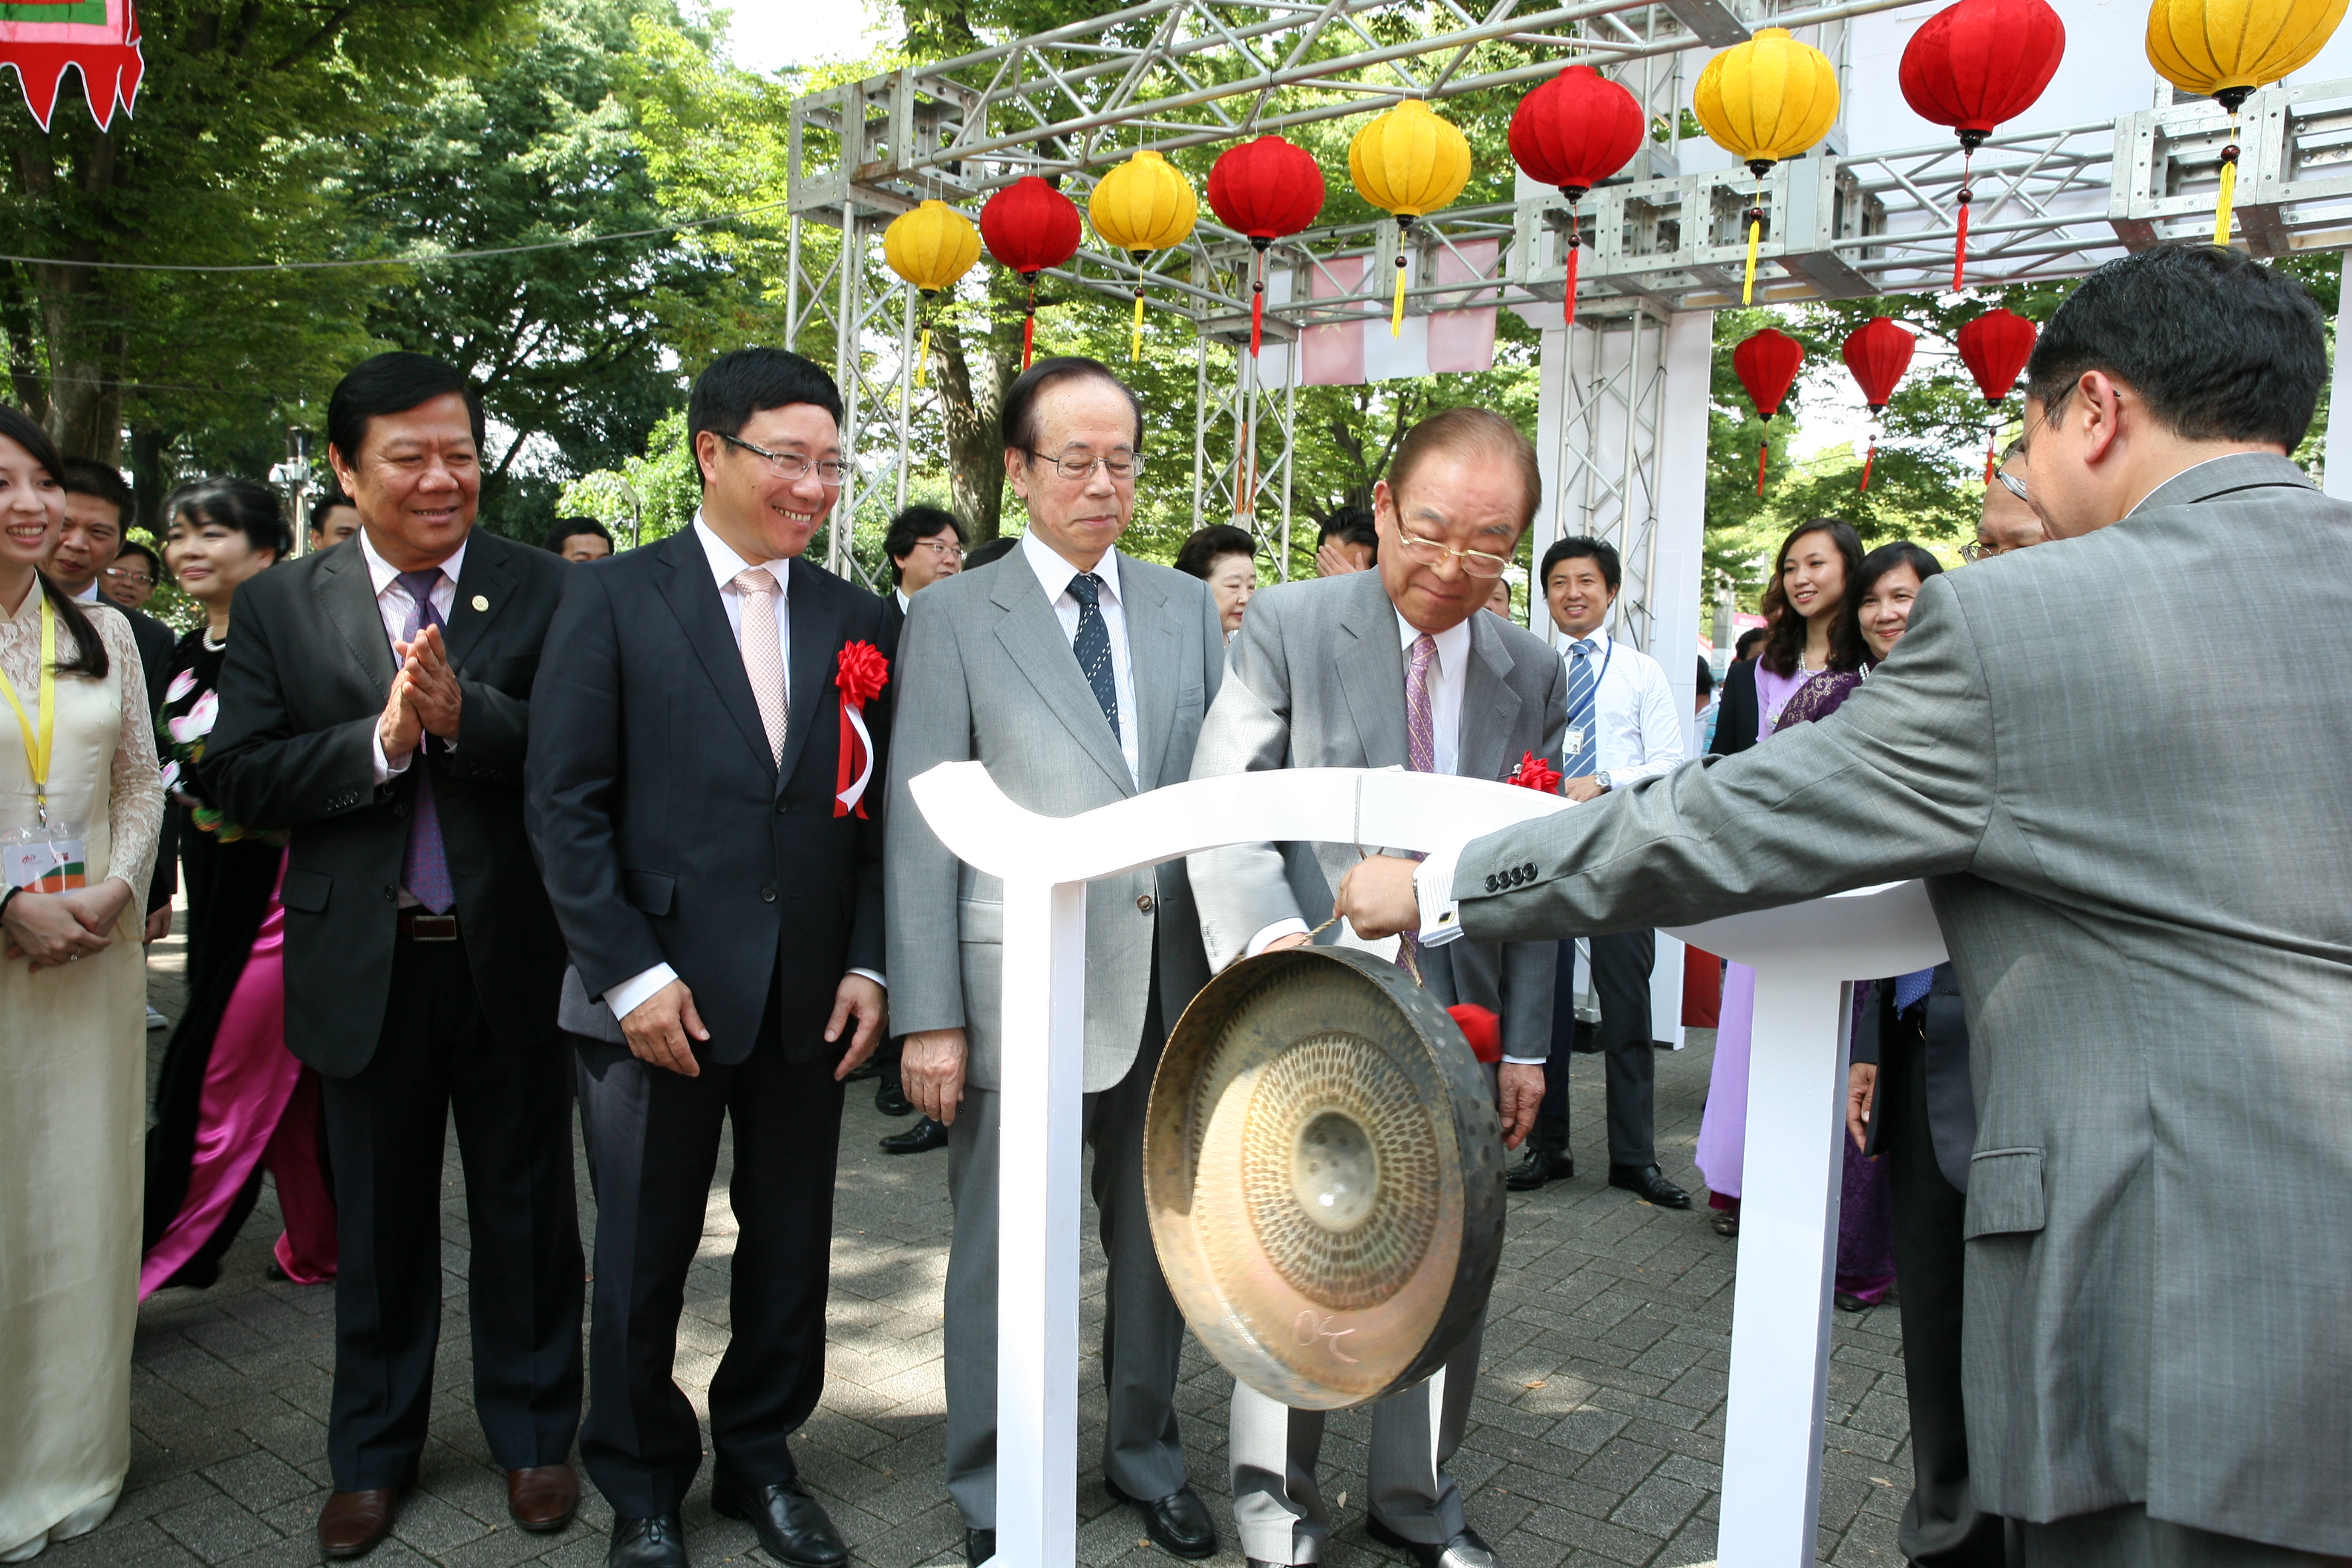 Vietnamese and Japanese representatives attend Vietnam Days in Japan event in 2013. Photo courtesy of the Ministry of Foreign Affairs.